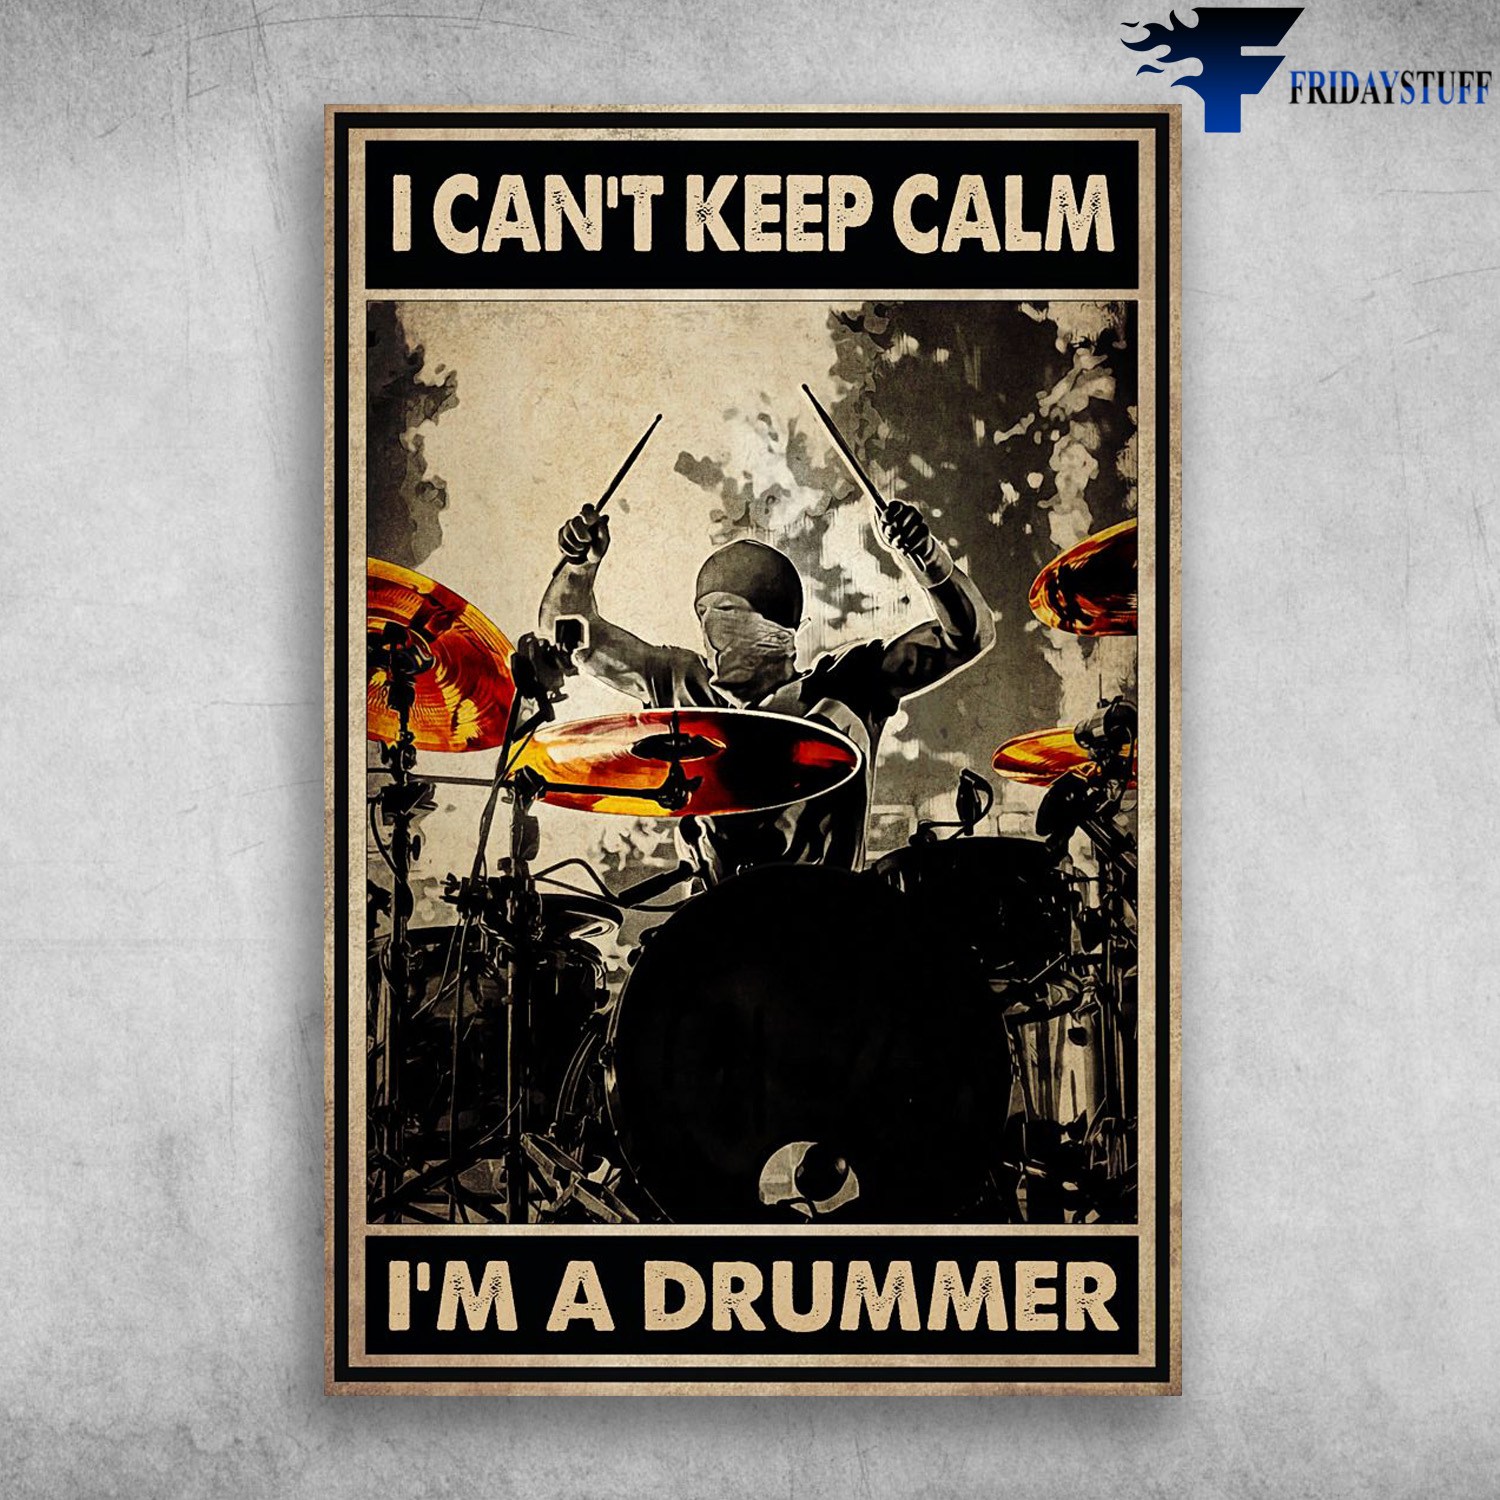 The Drummer - I Can't Keep Calm, I'm A Drummer